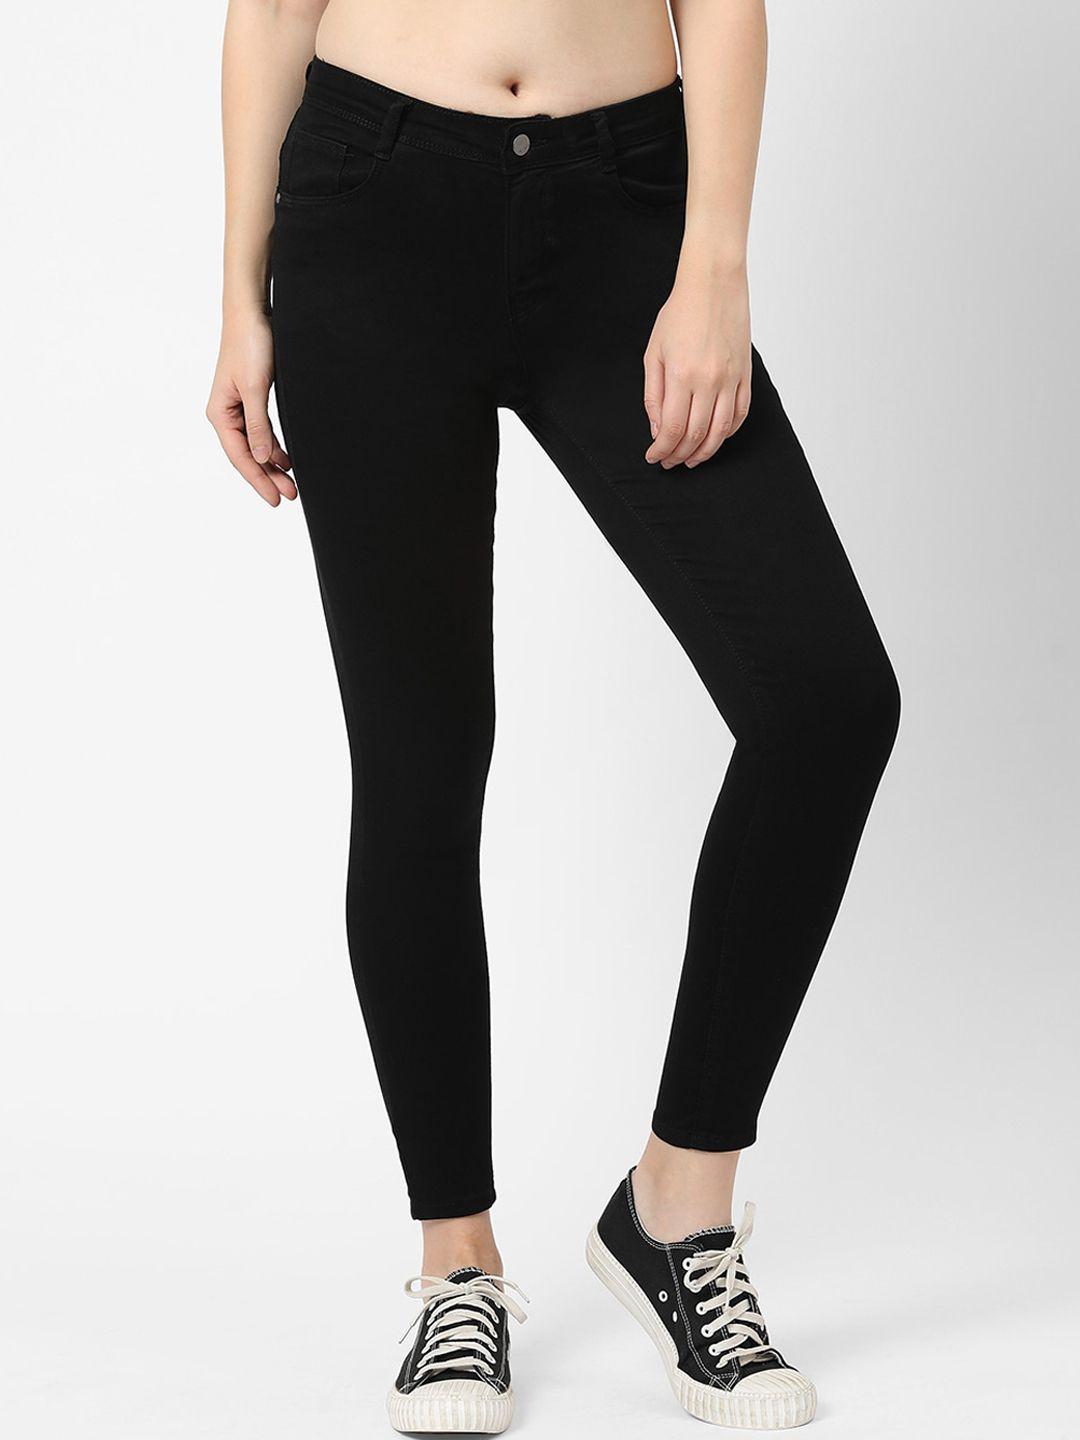 kraus-jeans-women-black-super-skinny-fit-cropped-stretchable-jeans